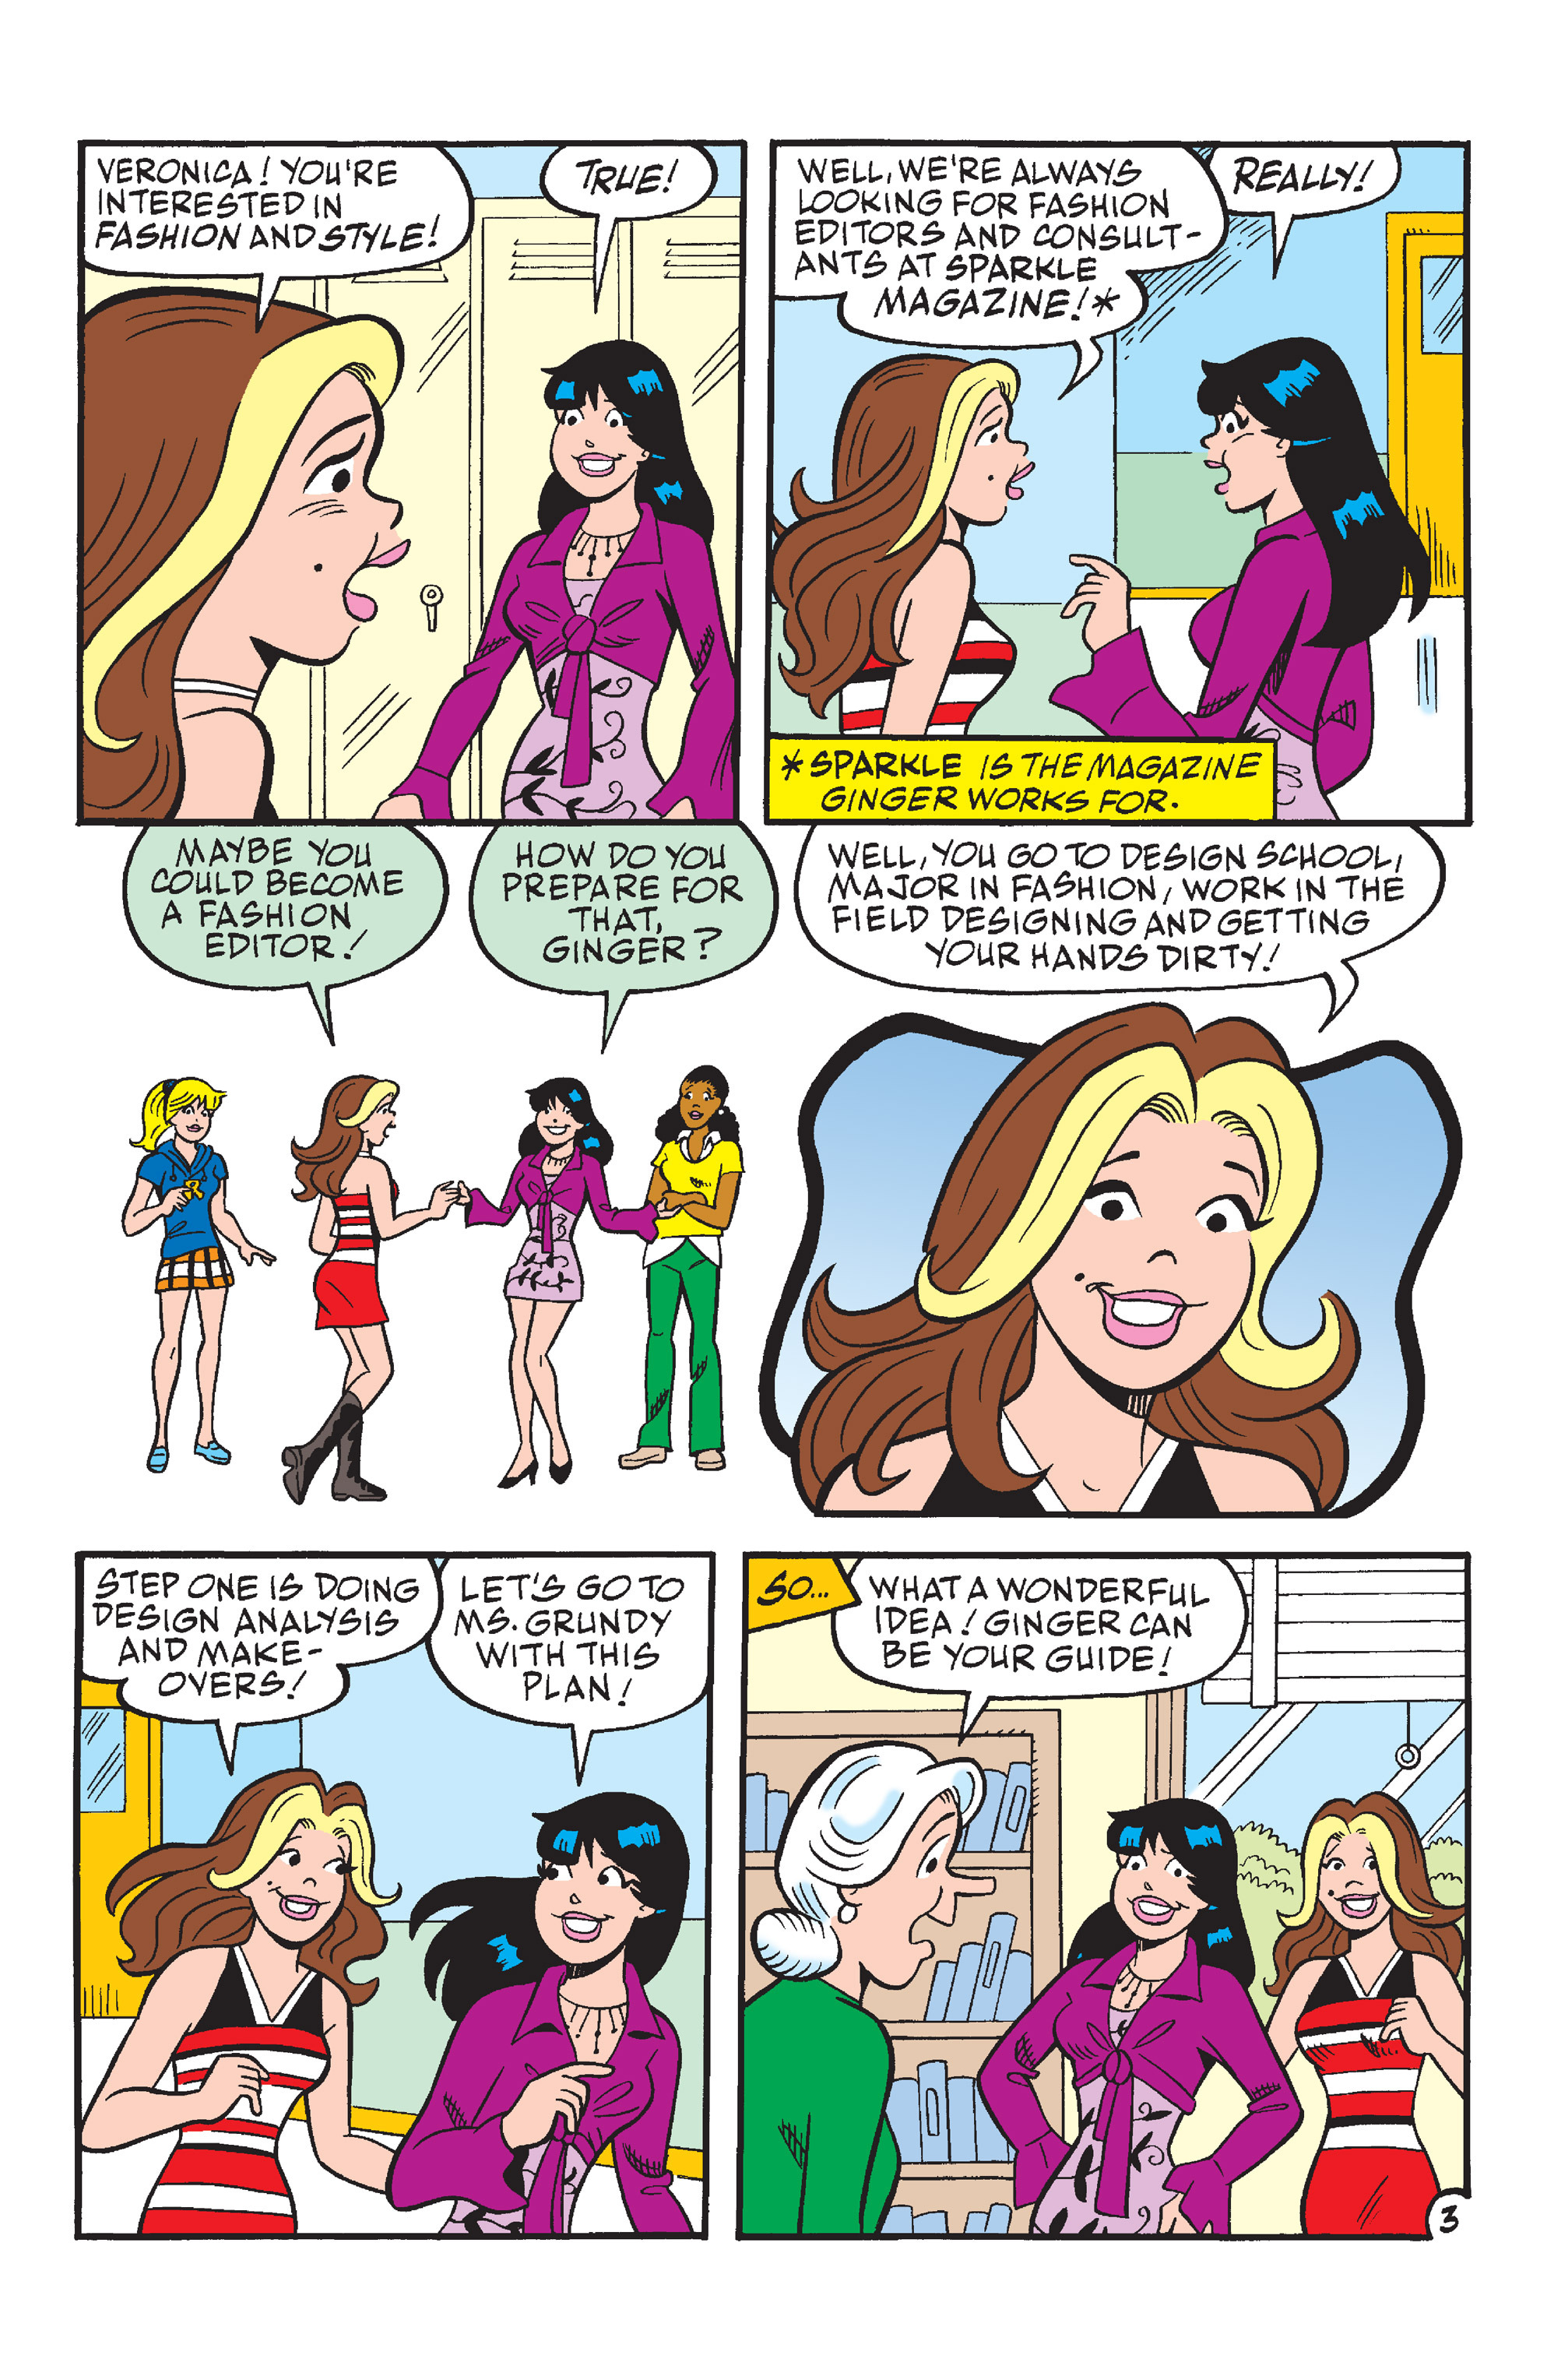 Read online Veronica's Hot Fashions comic -  Issue # TPB - 71